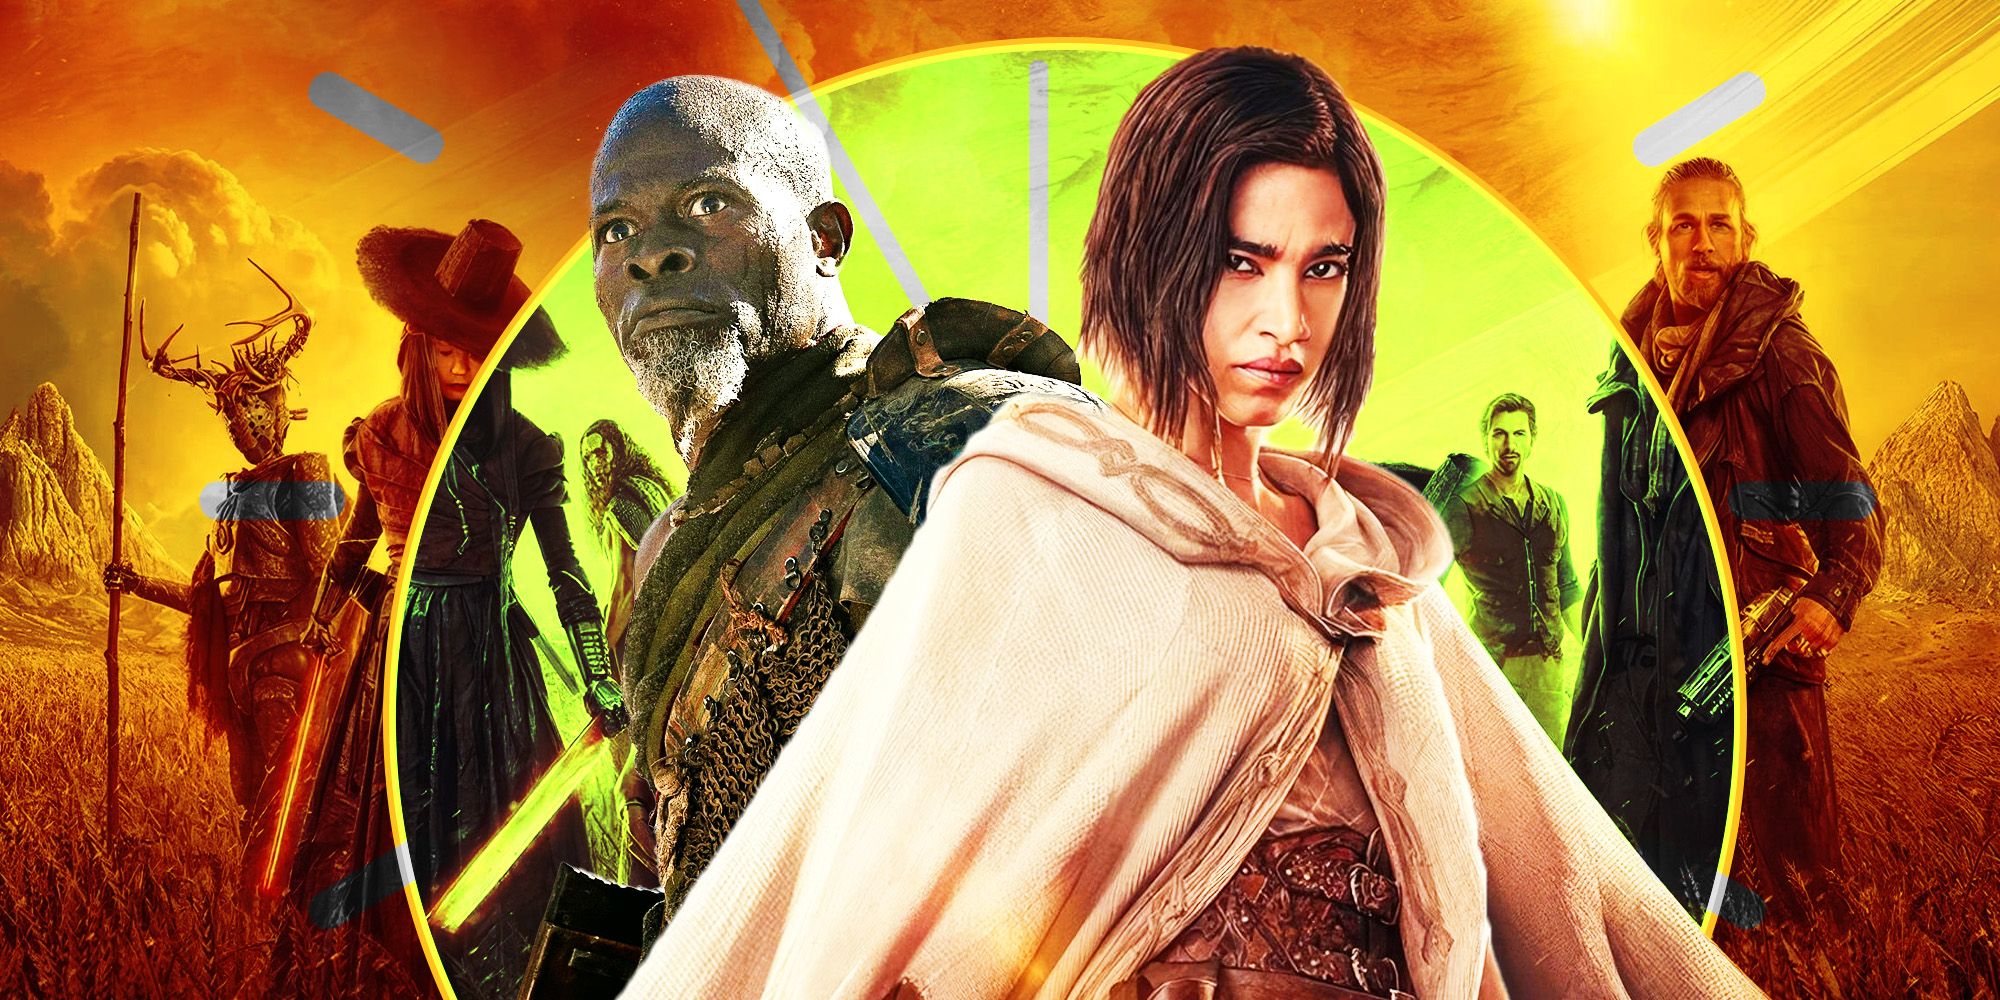 Sofia Boutella and Djimon Hounsou from Rebel Moon franchise with the remaining supporting cast in the background